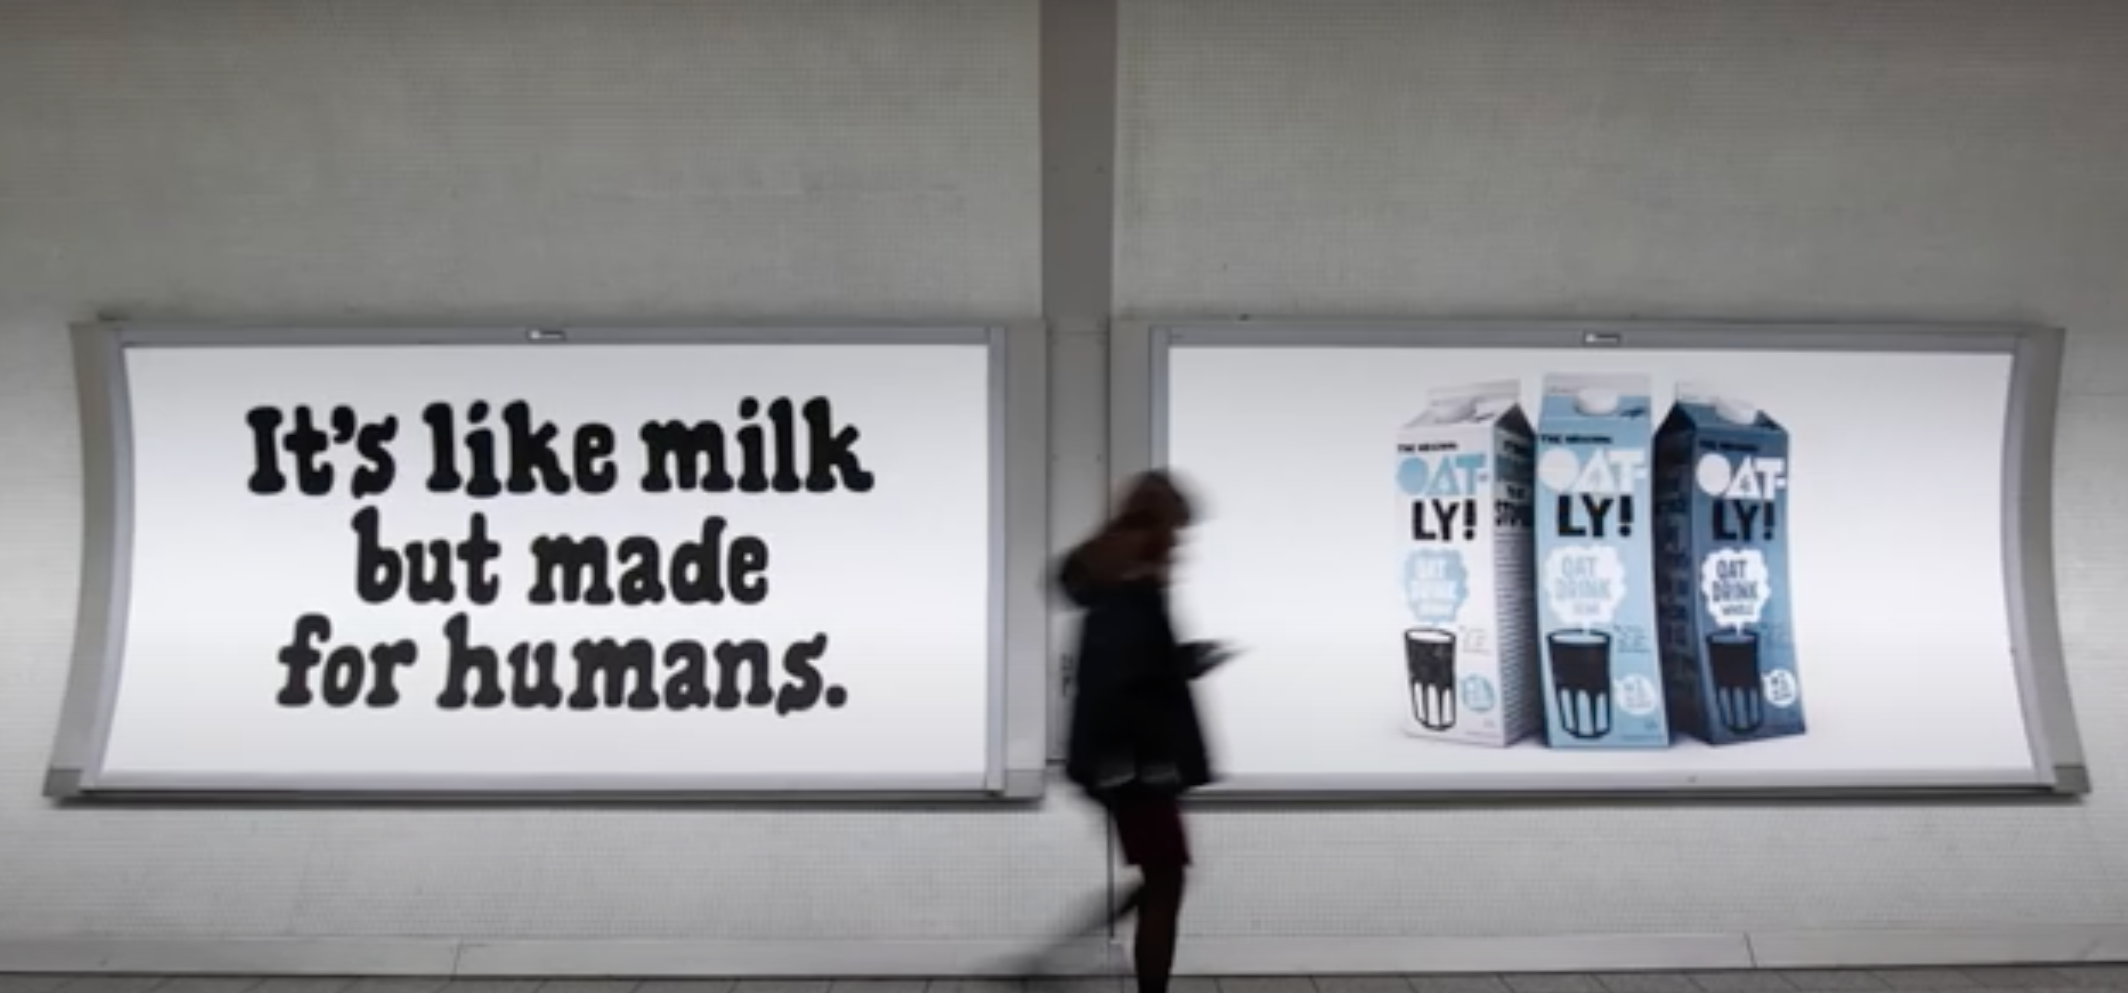 An image showing Oatly slogans for transport hubs for the SmartCuts Creative blog post.